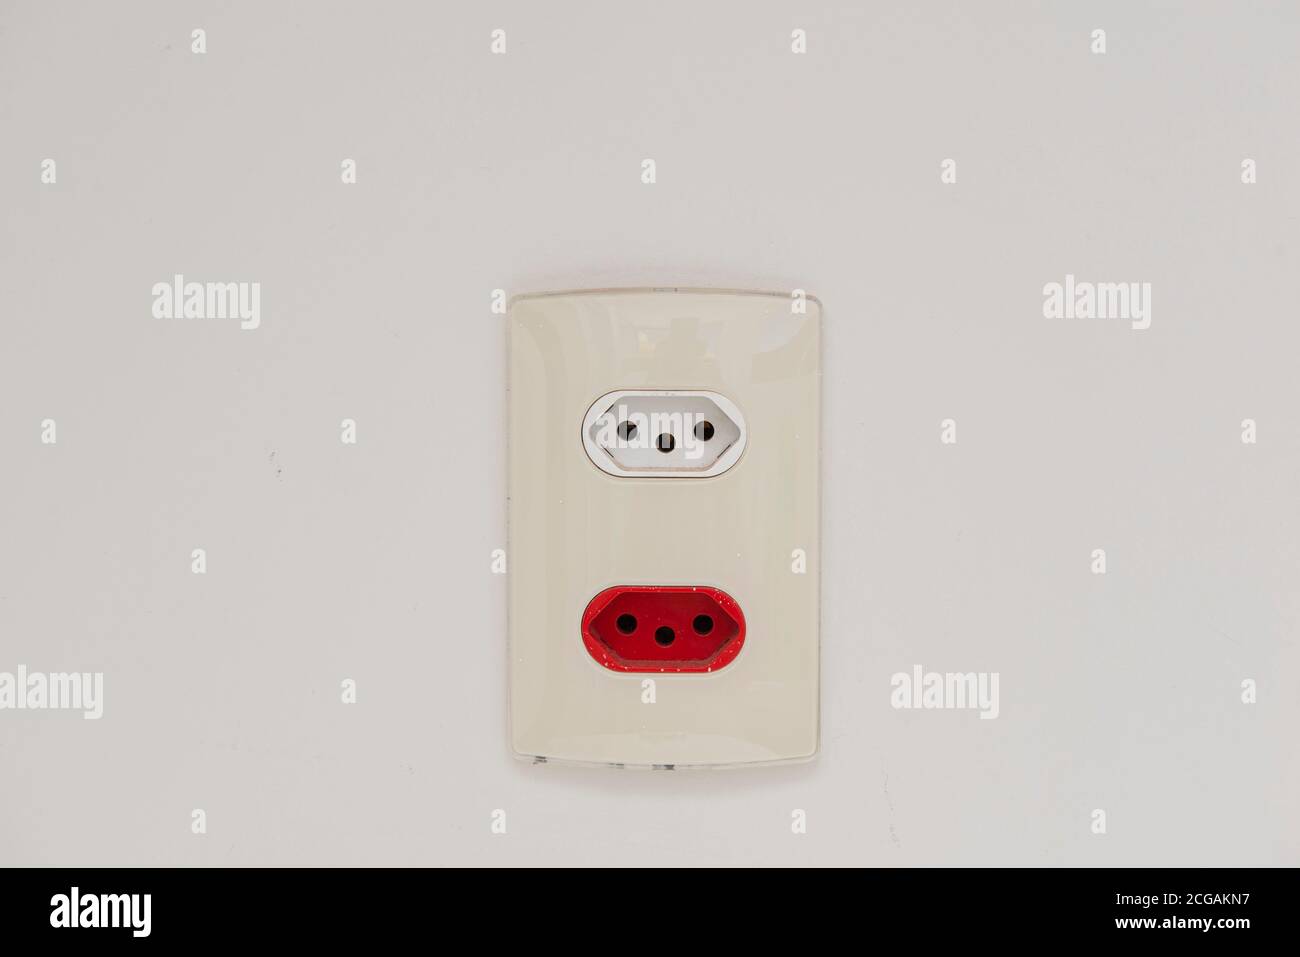 3 Pin Socket High Resolution Stock Photography and Images - Alamy